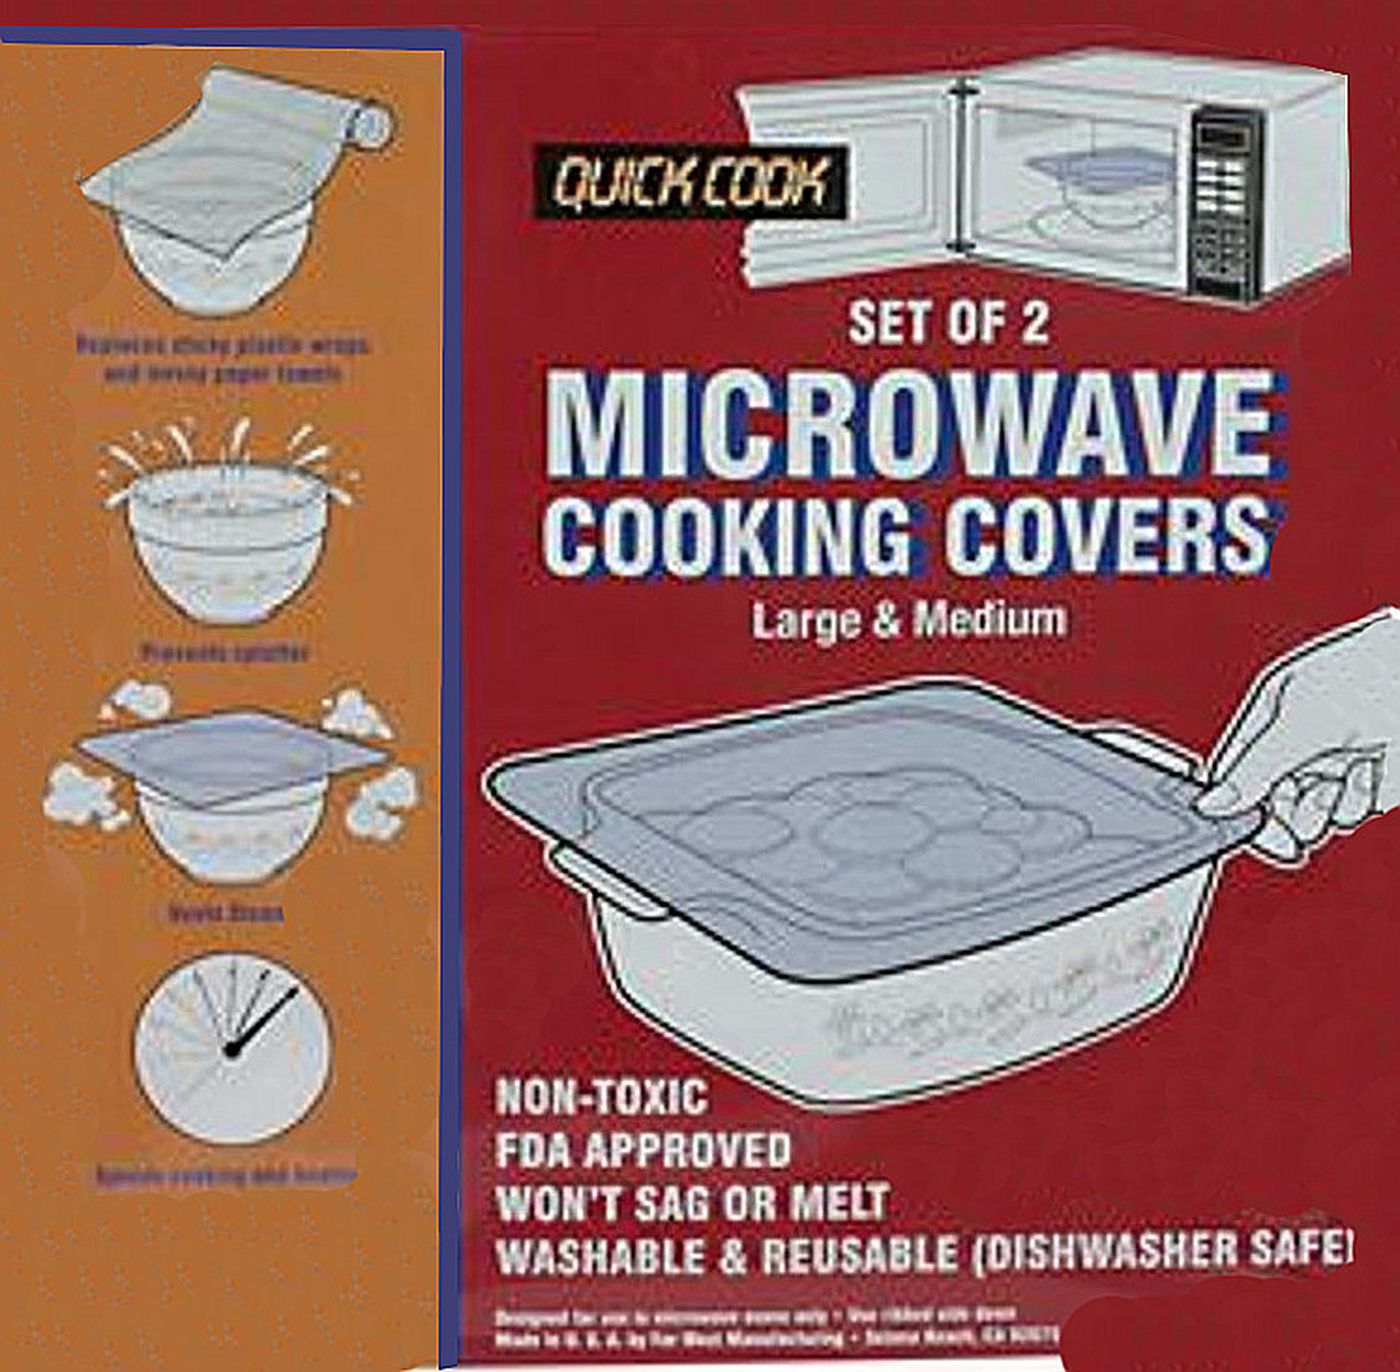 MICROWAVE COOKING COVERS